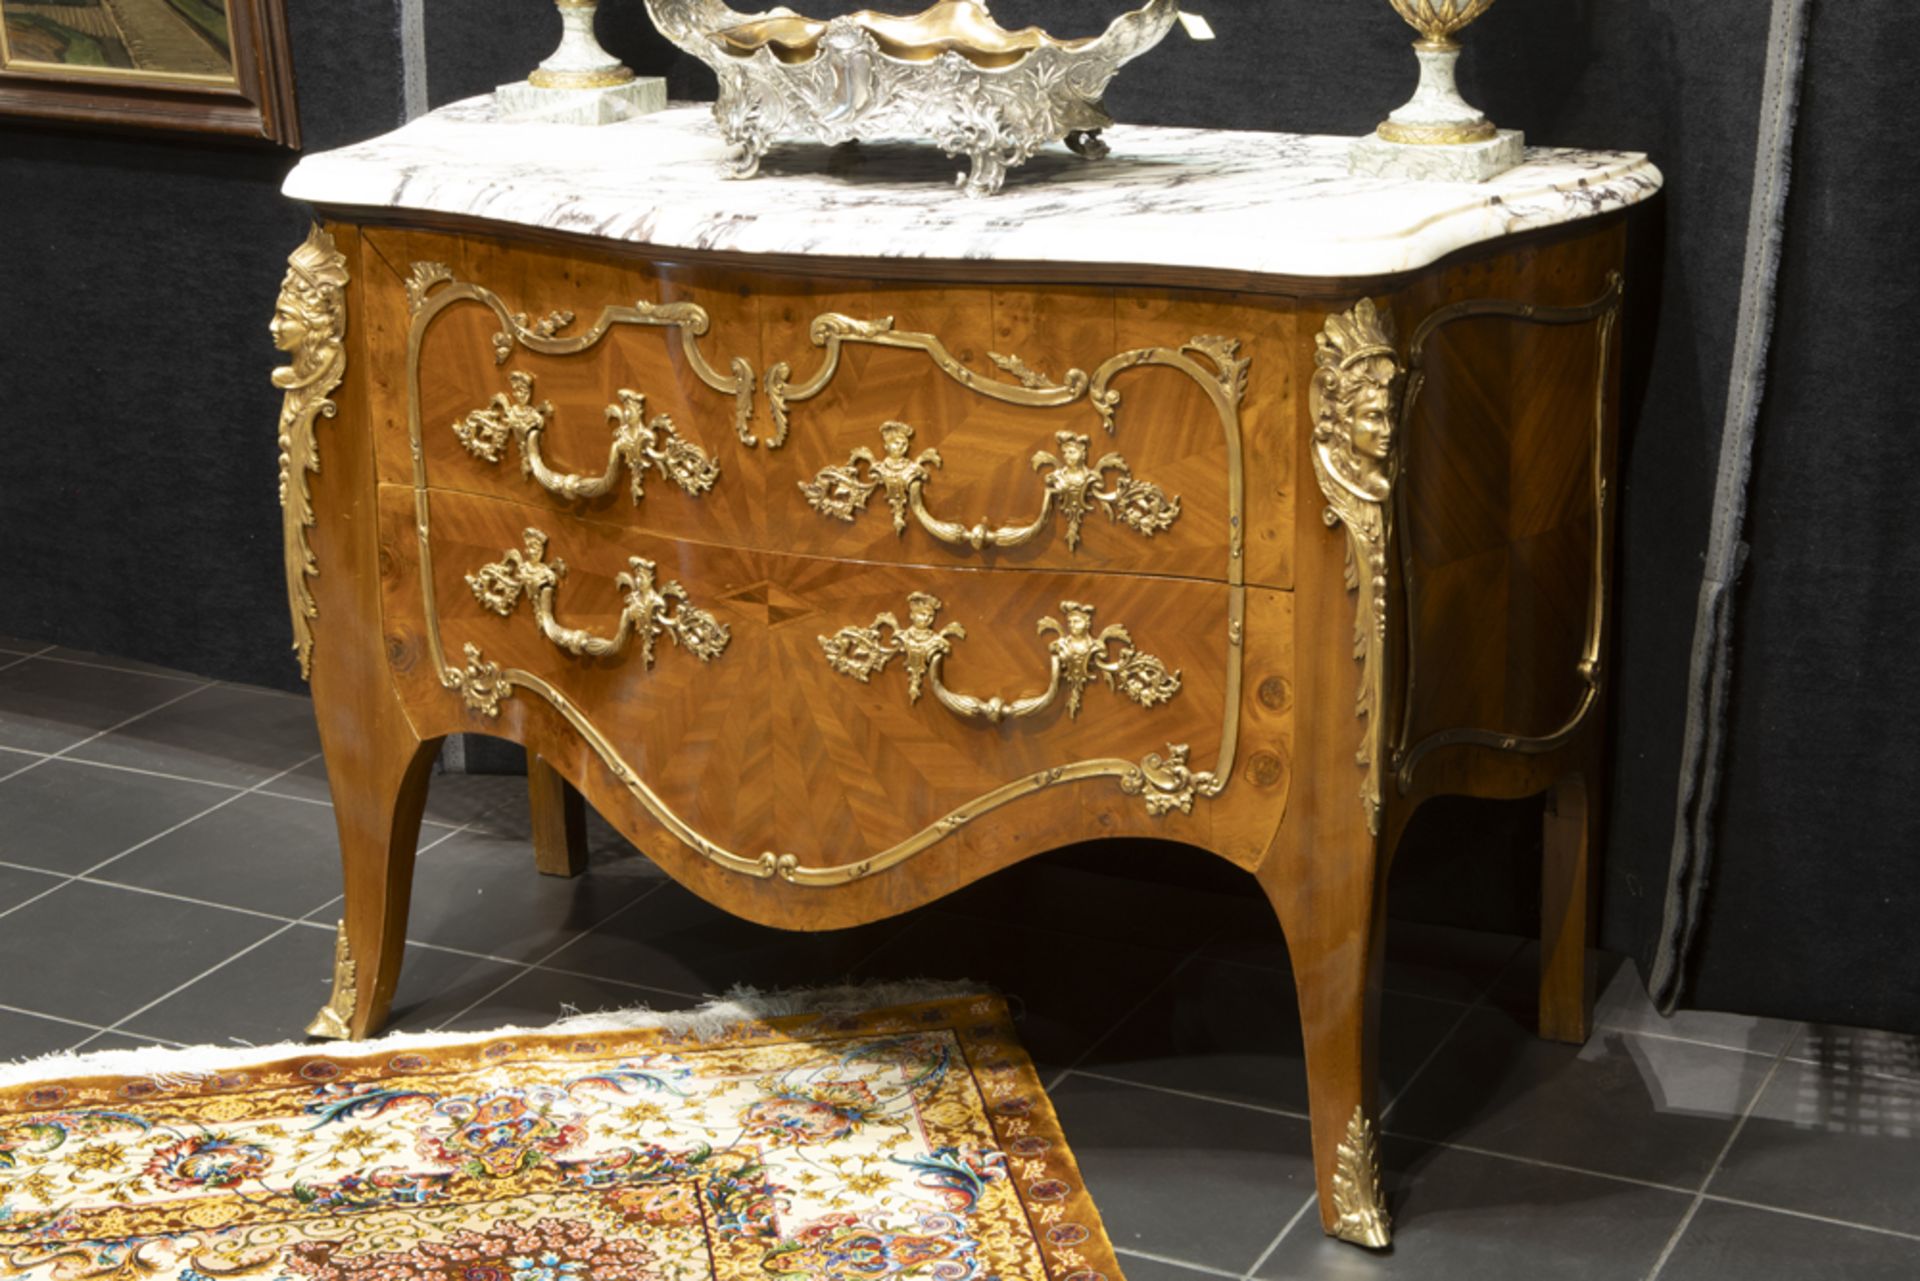 Louis XV style chest of drawers in burr of walnut with mountings in gilded bronze and with a quite